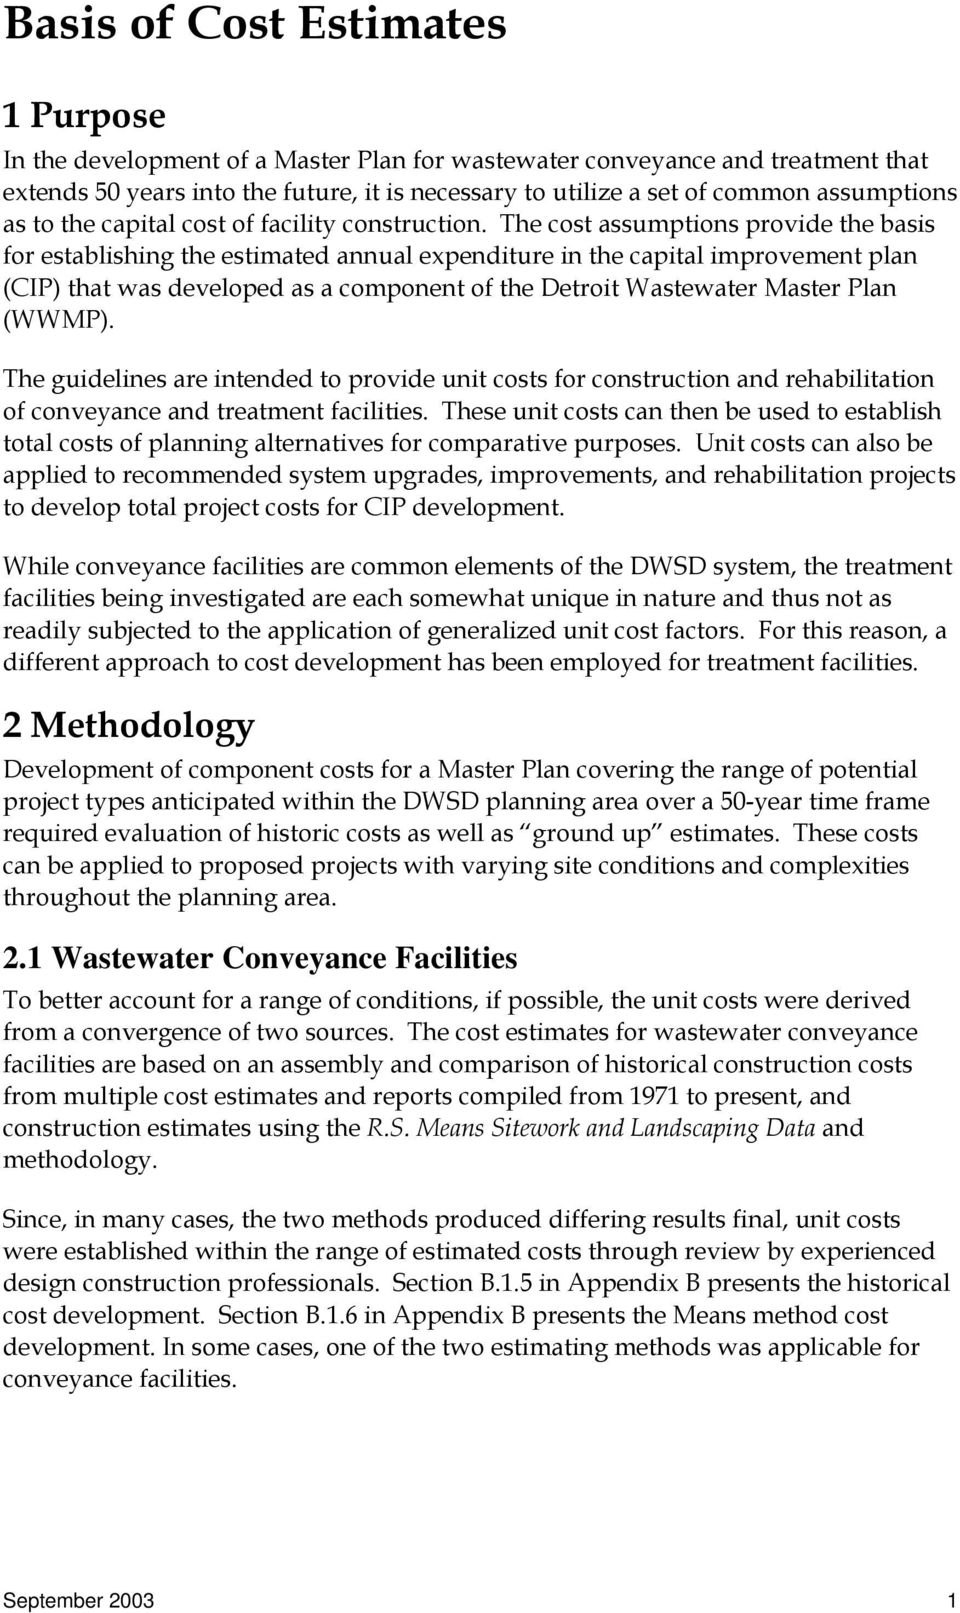 The cost assumptions provide the basis for establishing the estimated annual expenditure in the capital improvement plan (CIP) that was developed as a component of the Detroit Wastewater Master Plan